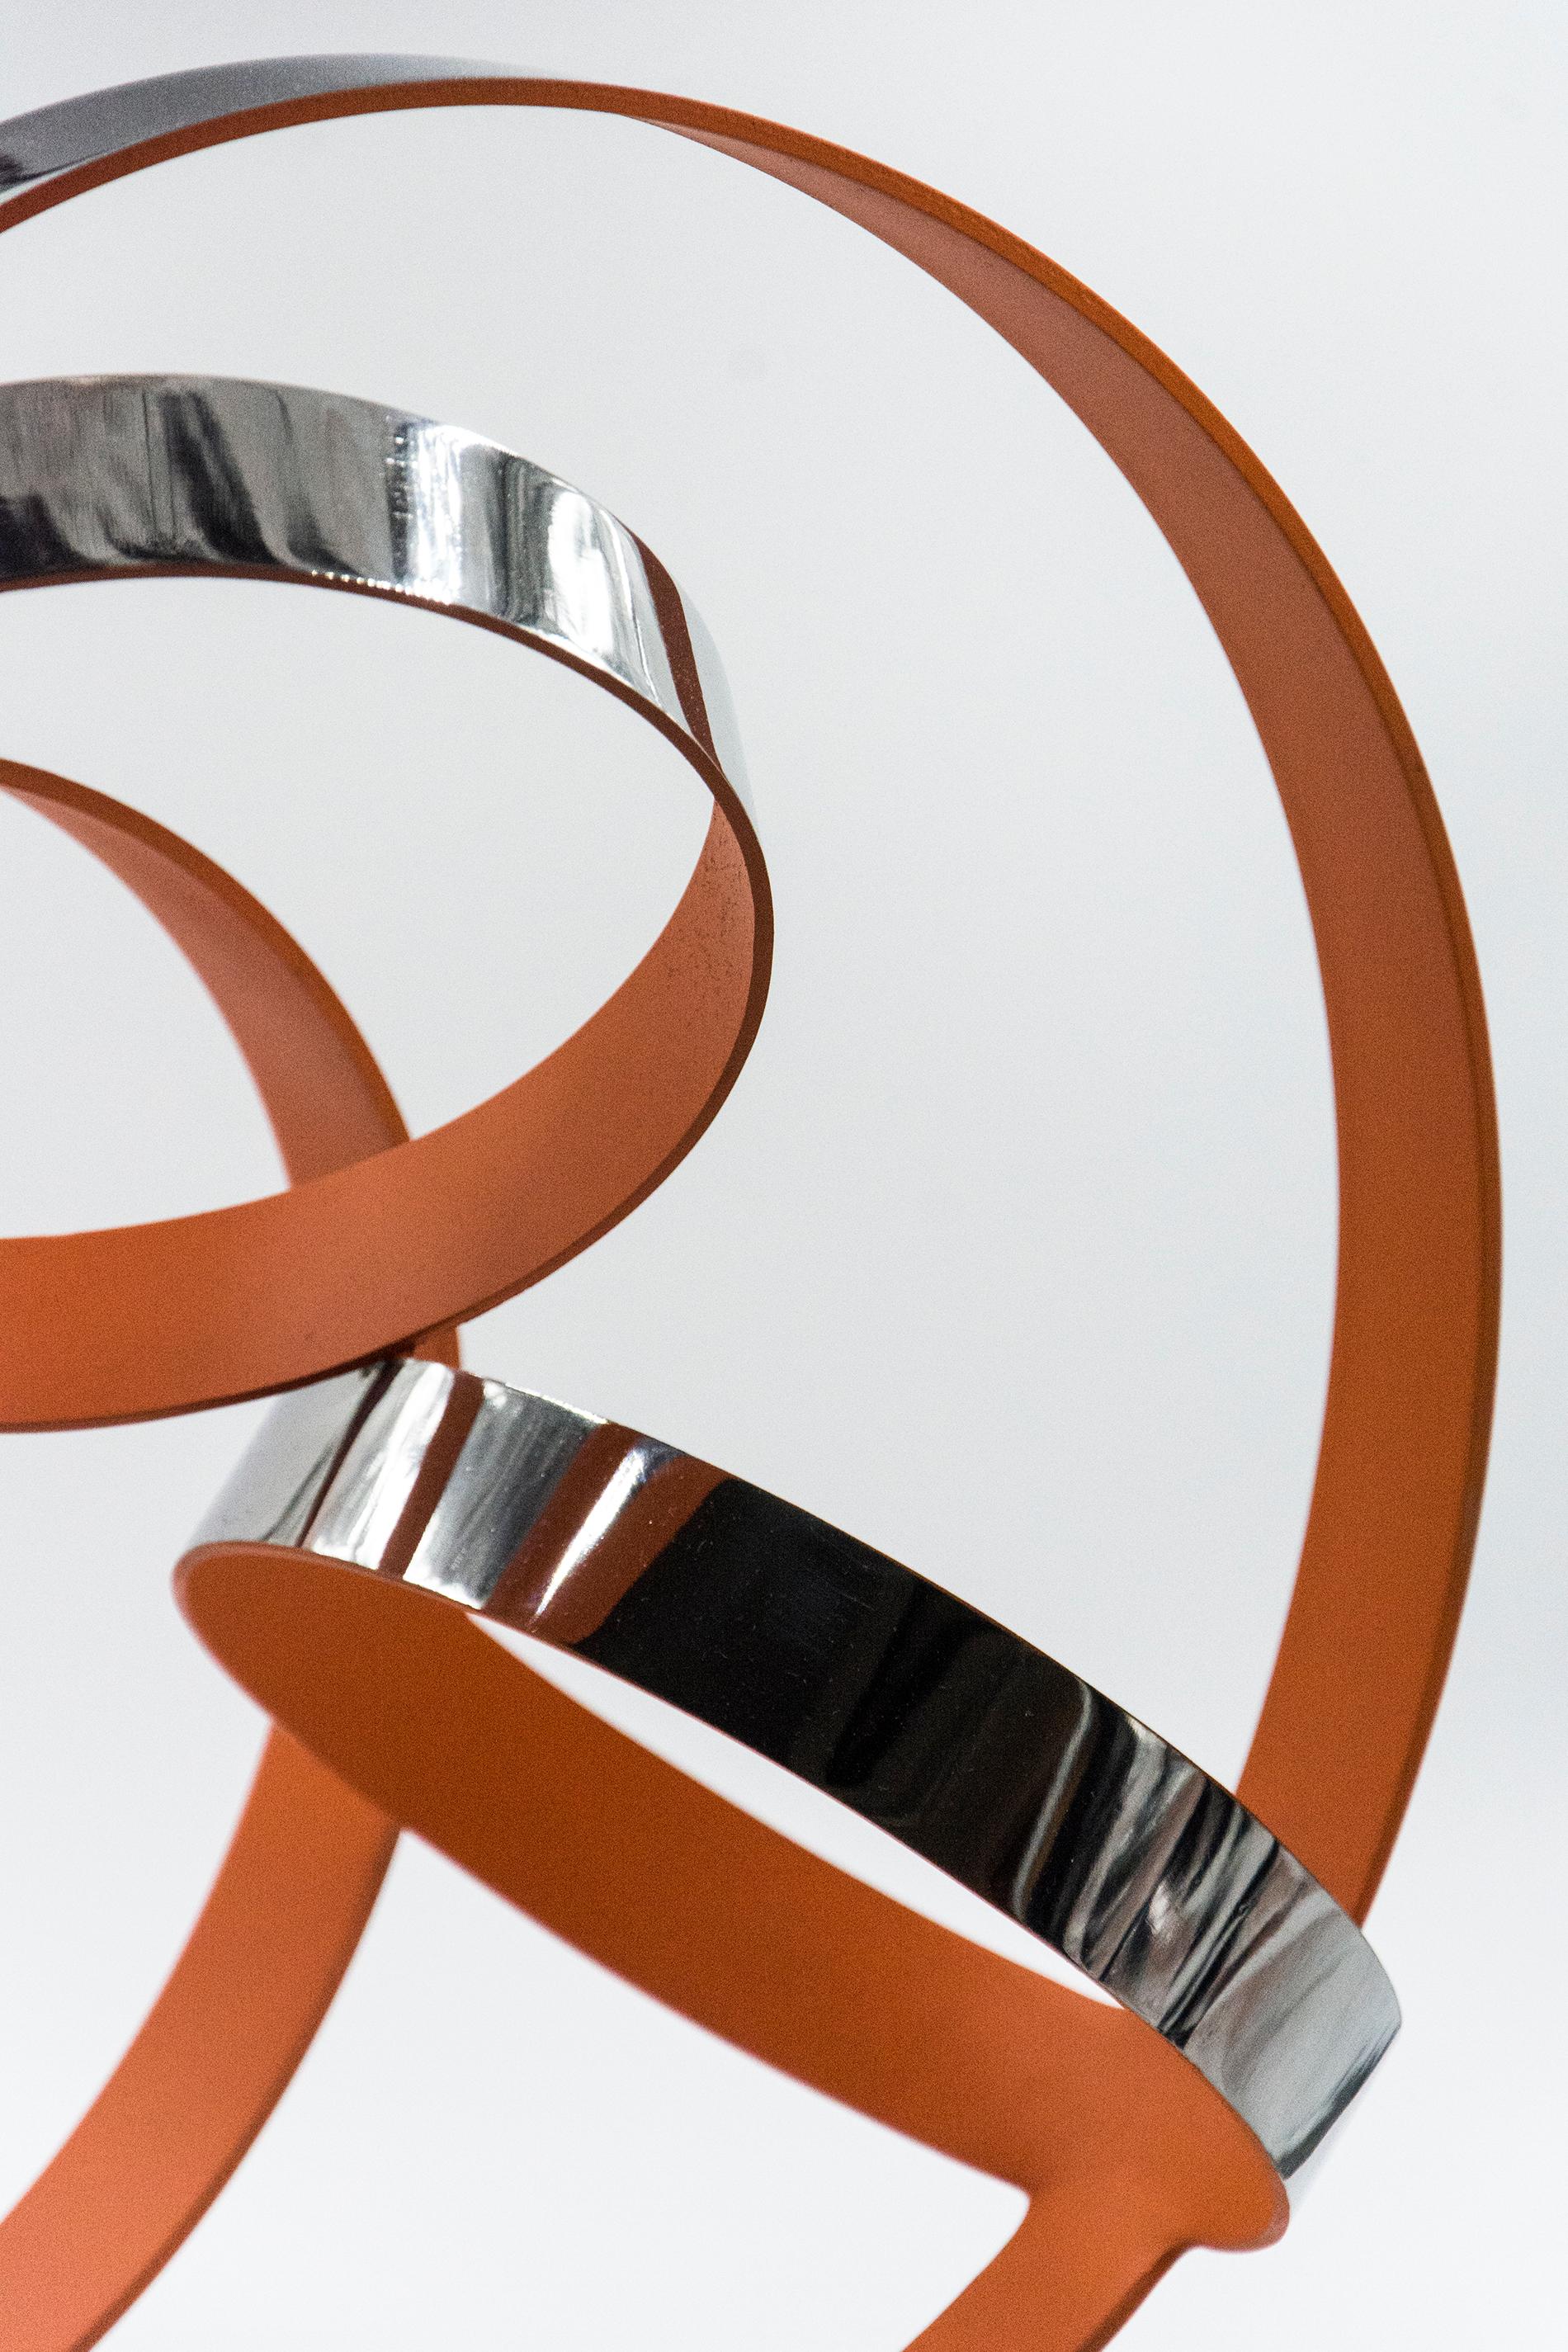 The bright orange interior of these stainless-steel rings by Phillipe Pallafray provides a stunning contrast to the highly polished reflective exterior of this abstract sculpture. Pallafray’s work is designed to represent the duality of nature and